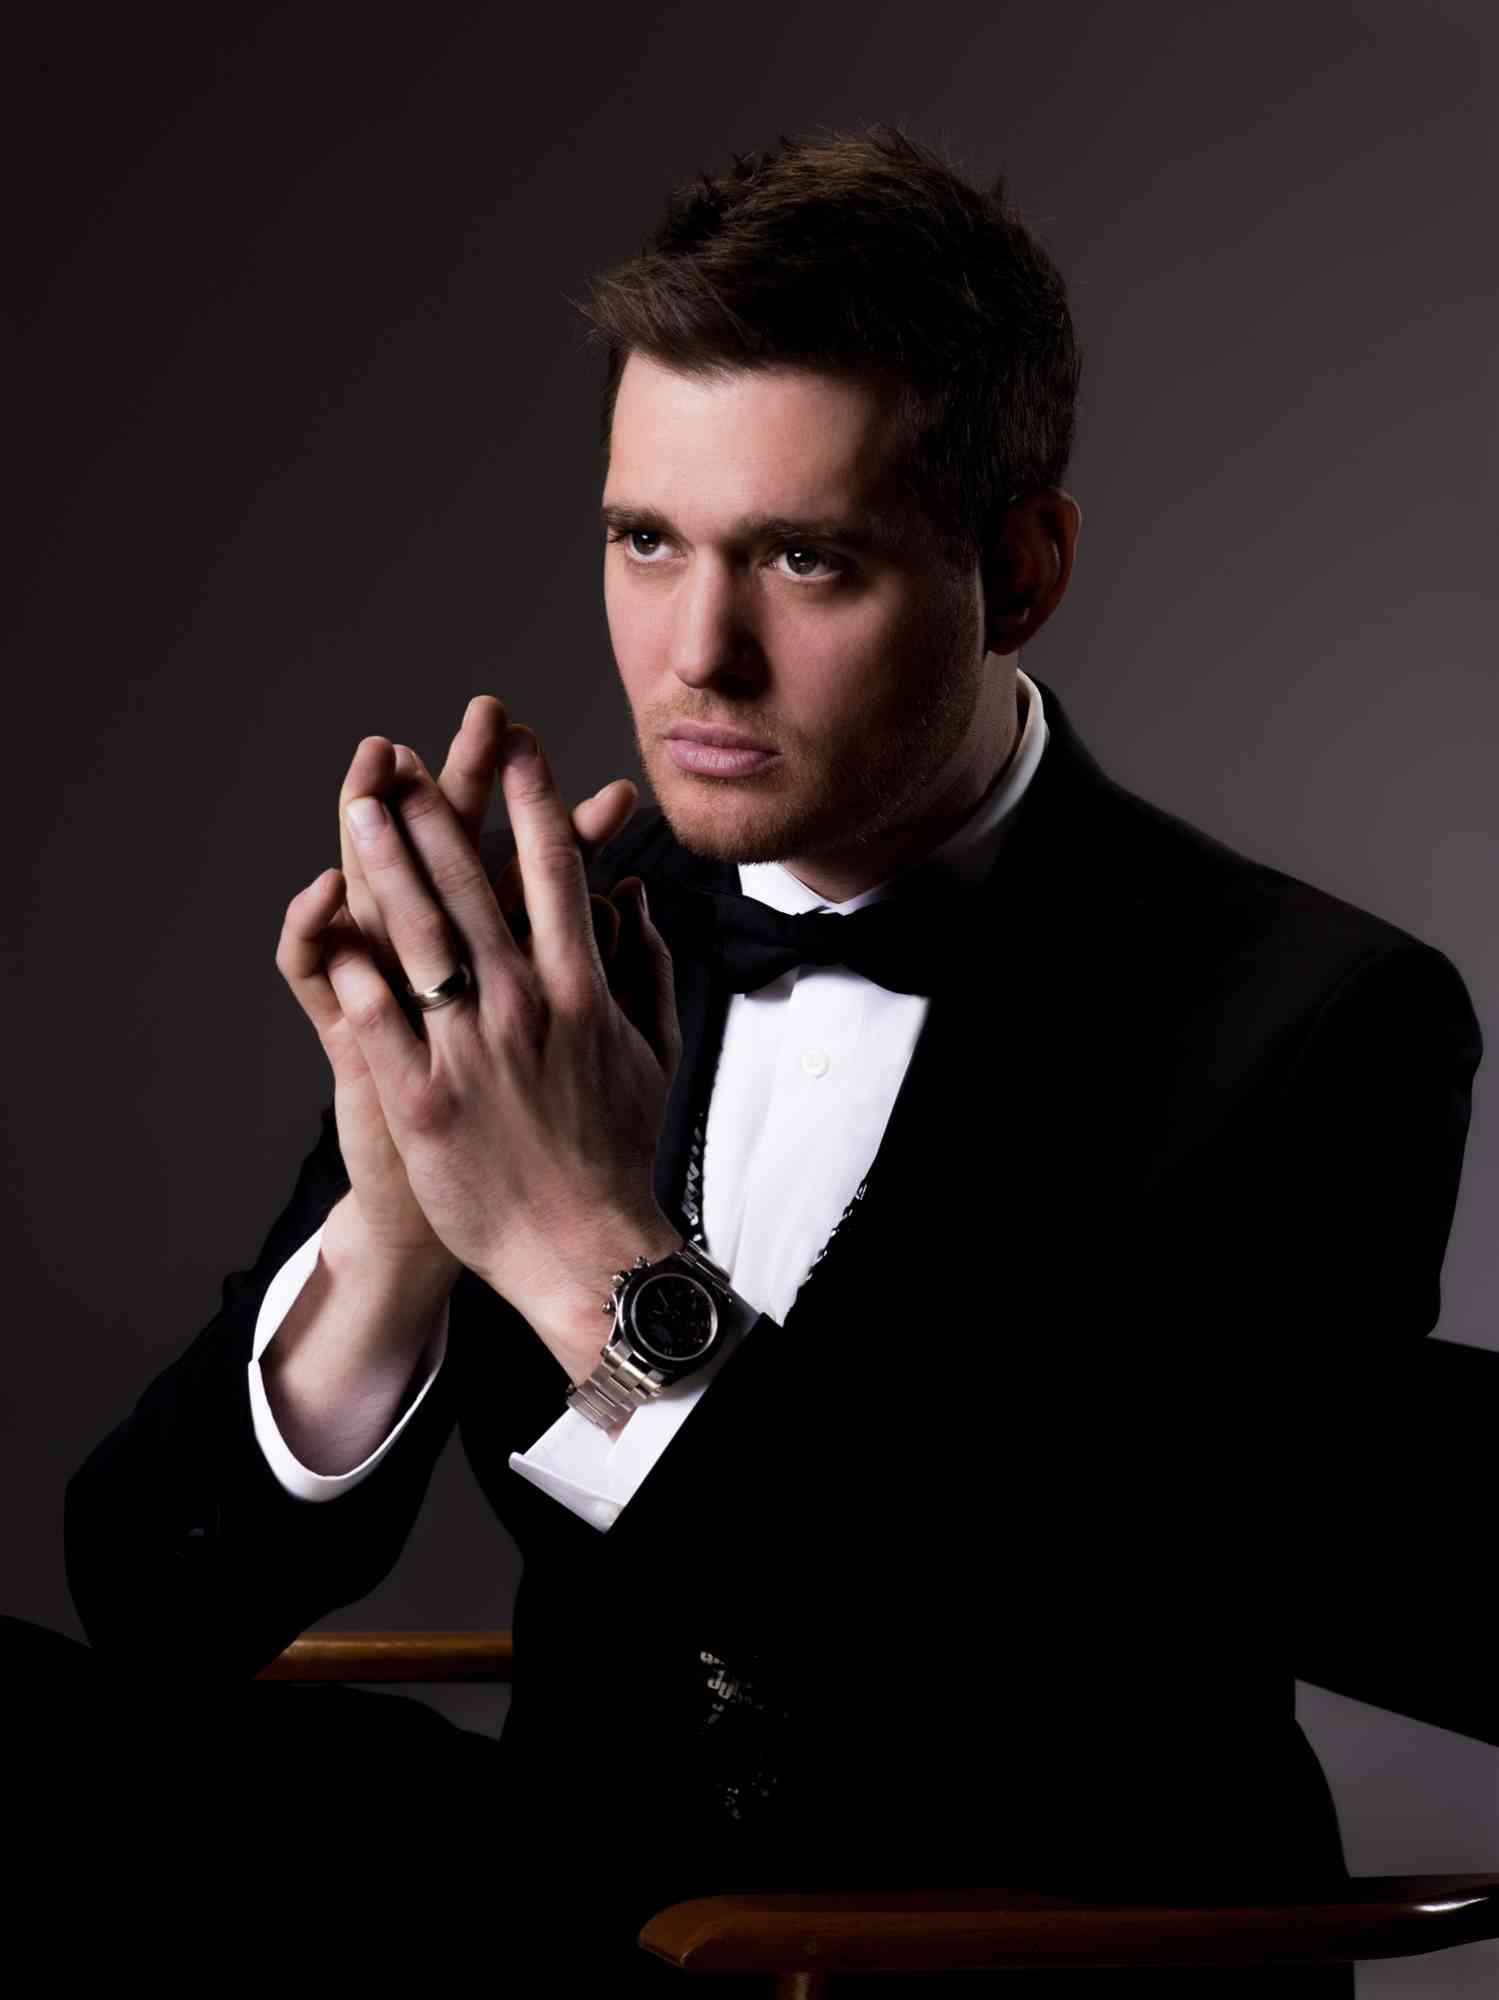 Iconic Image of Michael Buble's new album cover by Warwick Saint